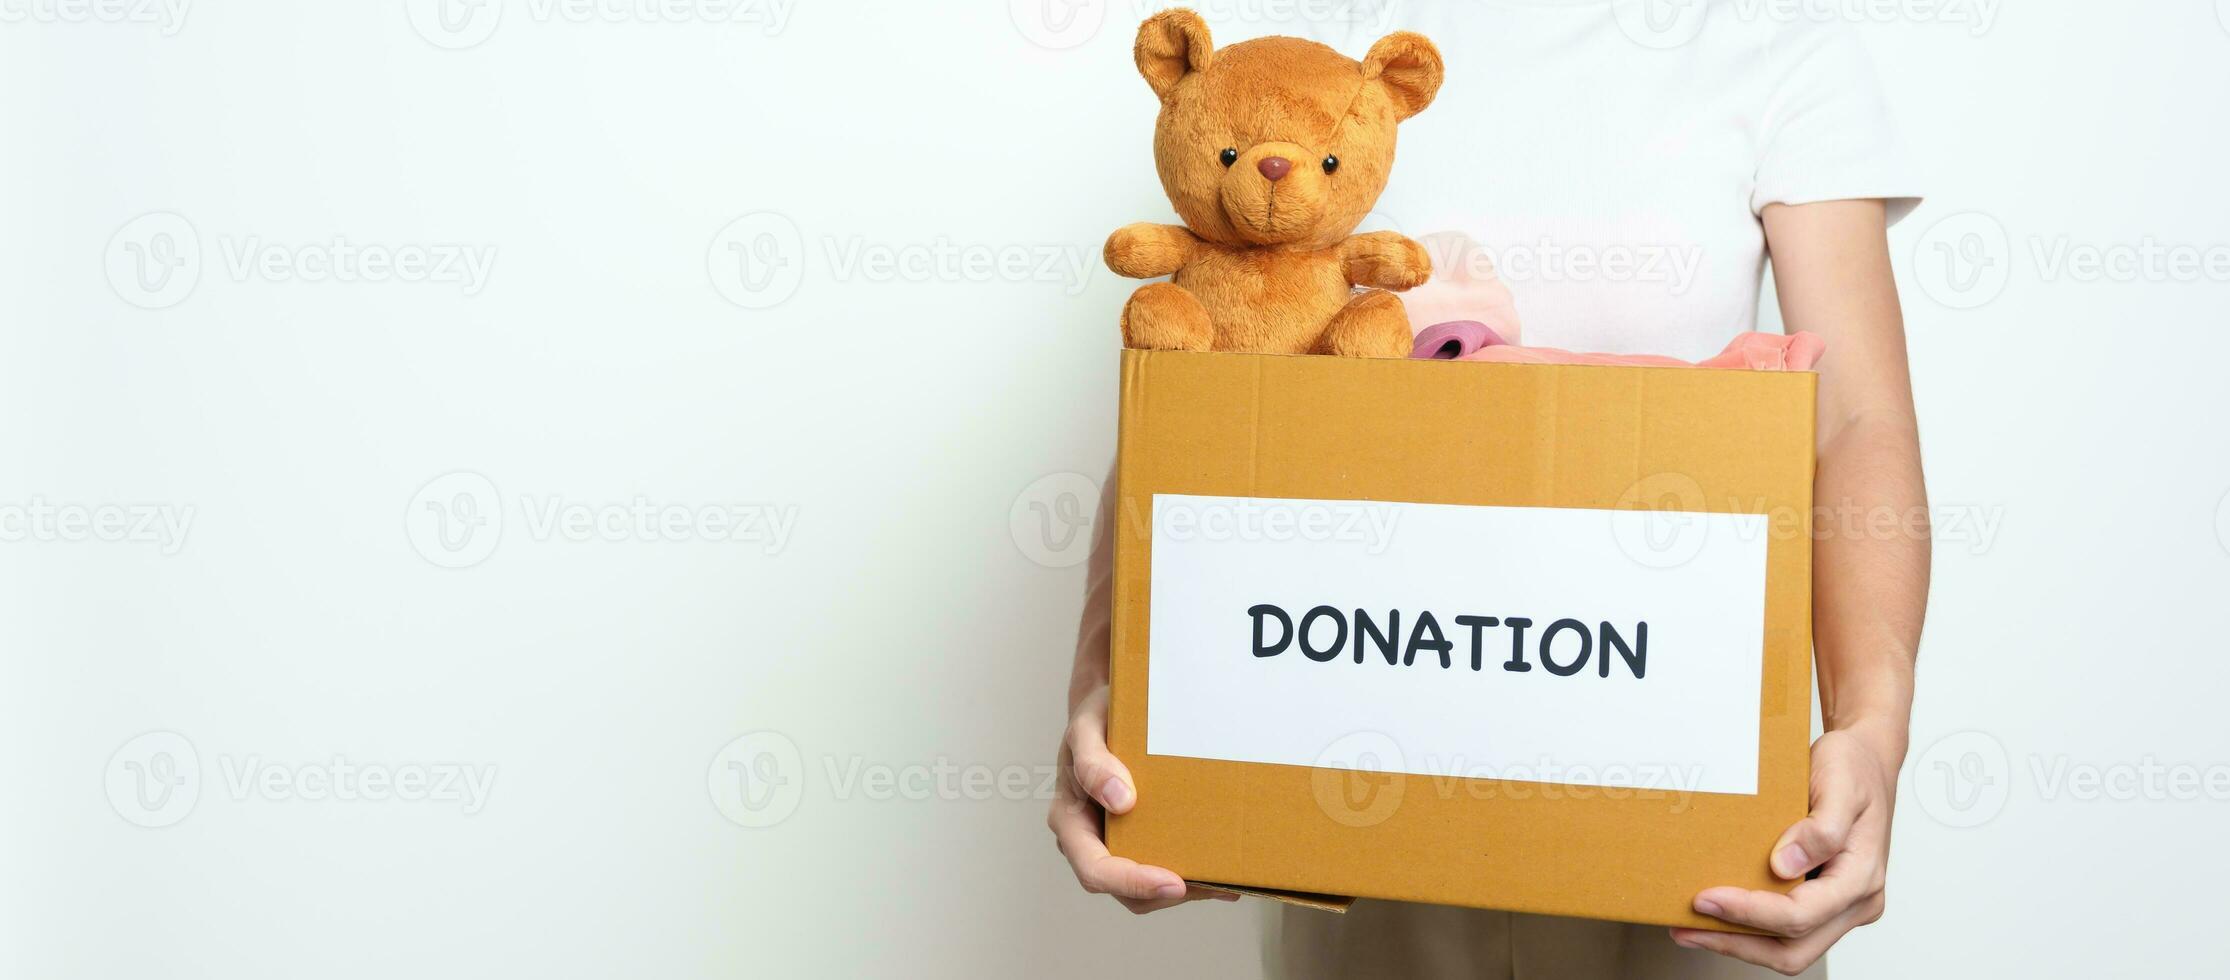 Kid Donation, Charity, Volunteer, Giving and Delivery Concept. Hand holding Bear doll and Clothes into Donation box at home for support and help poor, refugee and homeless people. Copy space for text photo